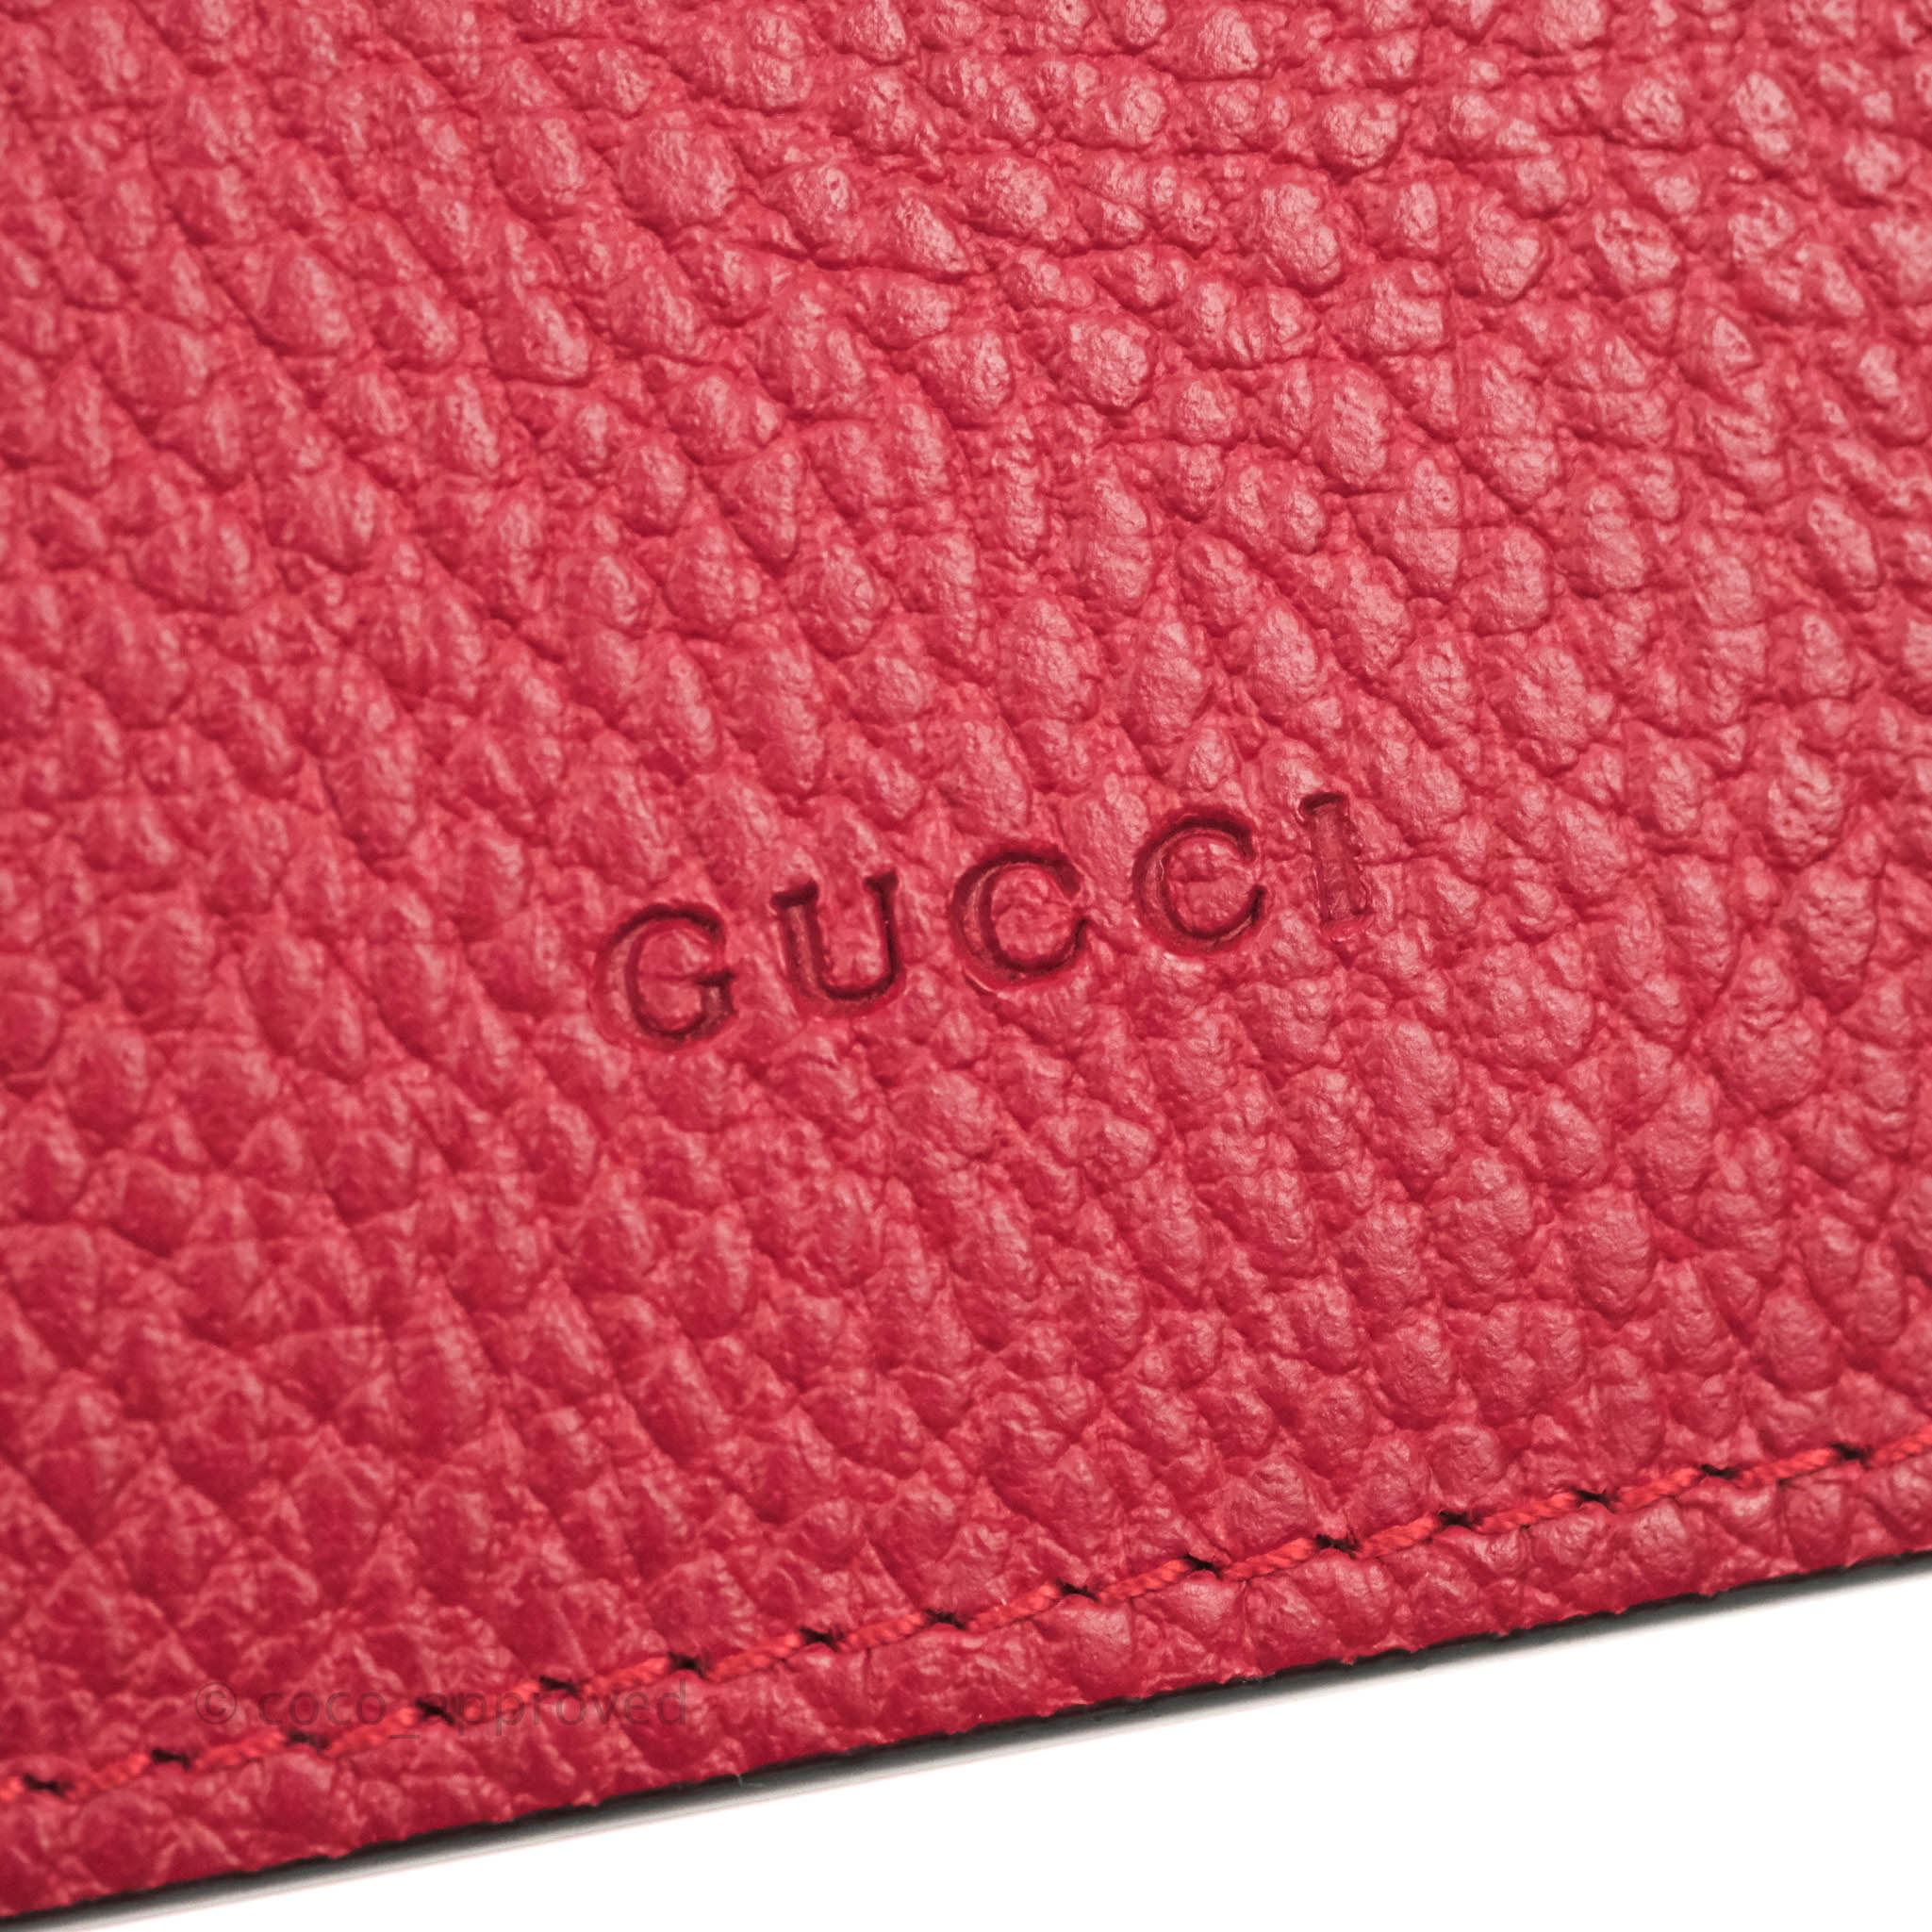 Gucci Dionysus Leather Chain Clutch Red 404141